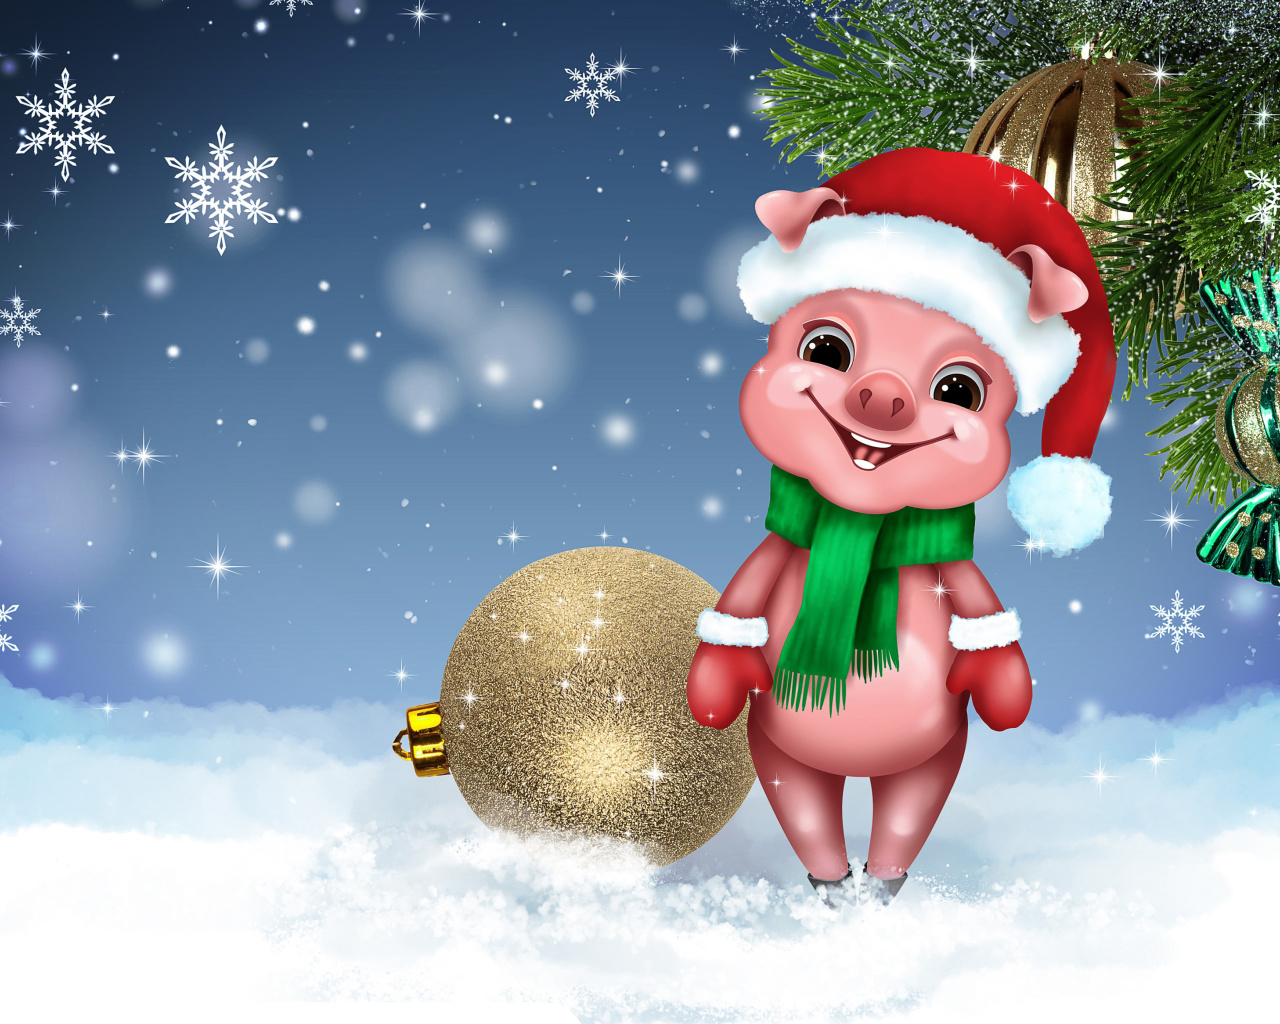 Das 2019 Pig New Year Chinese Astrology Wallpaper 1280x1024